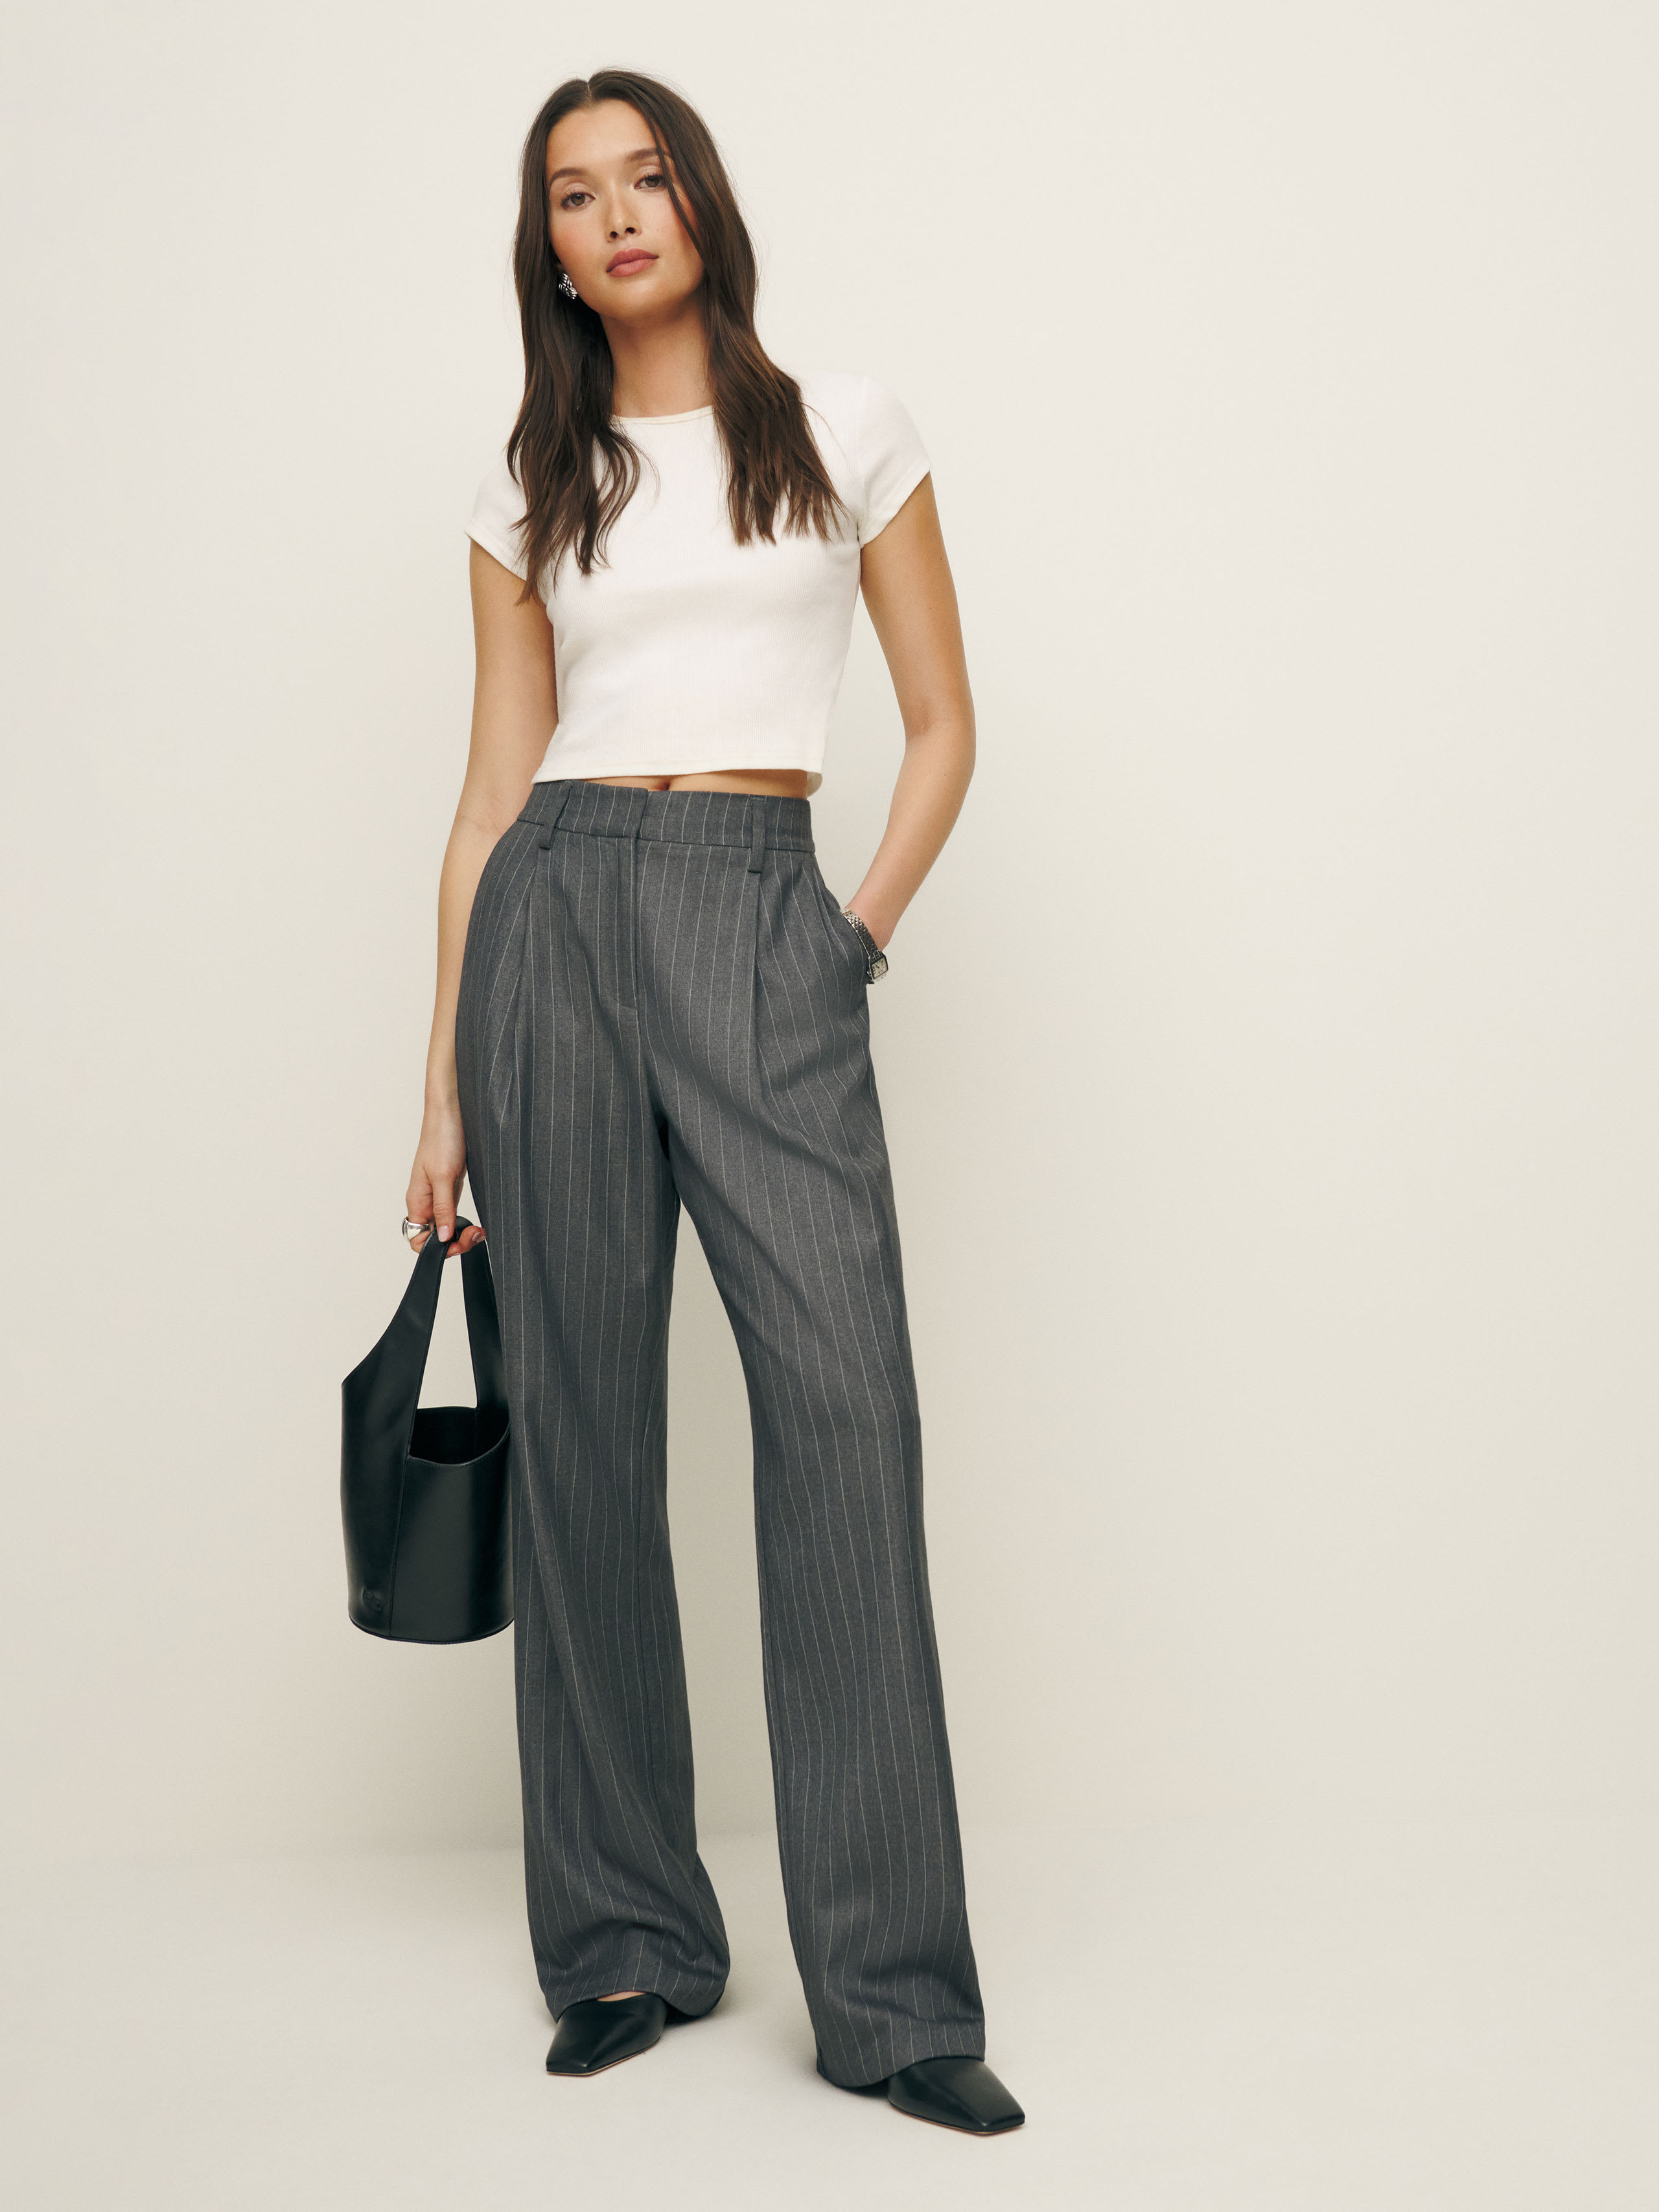 Reformation Alex Trouser In Charcoal Stripe